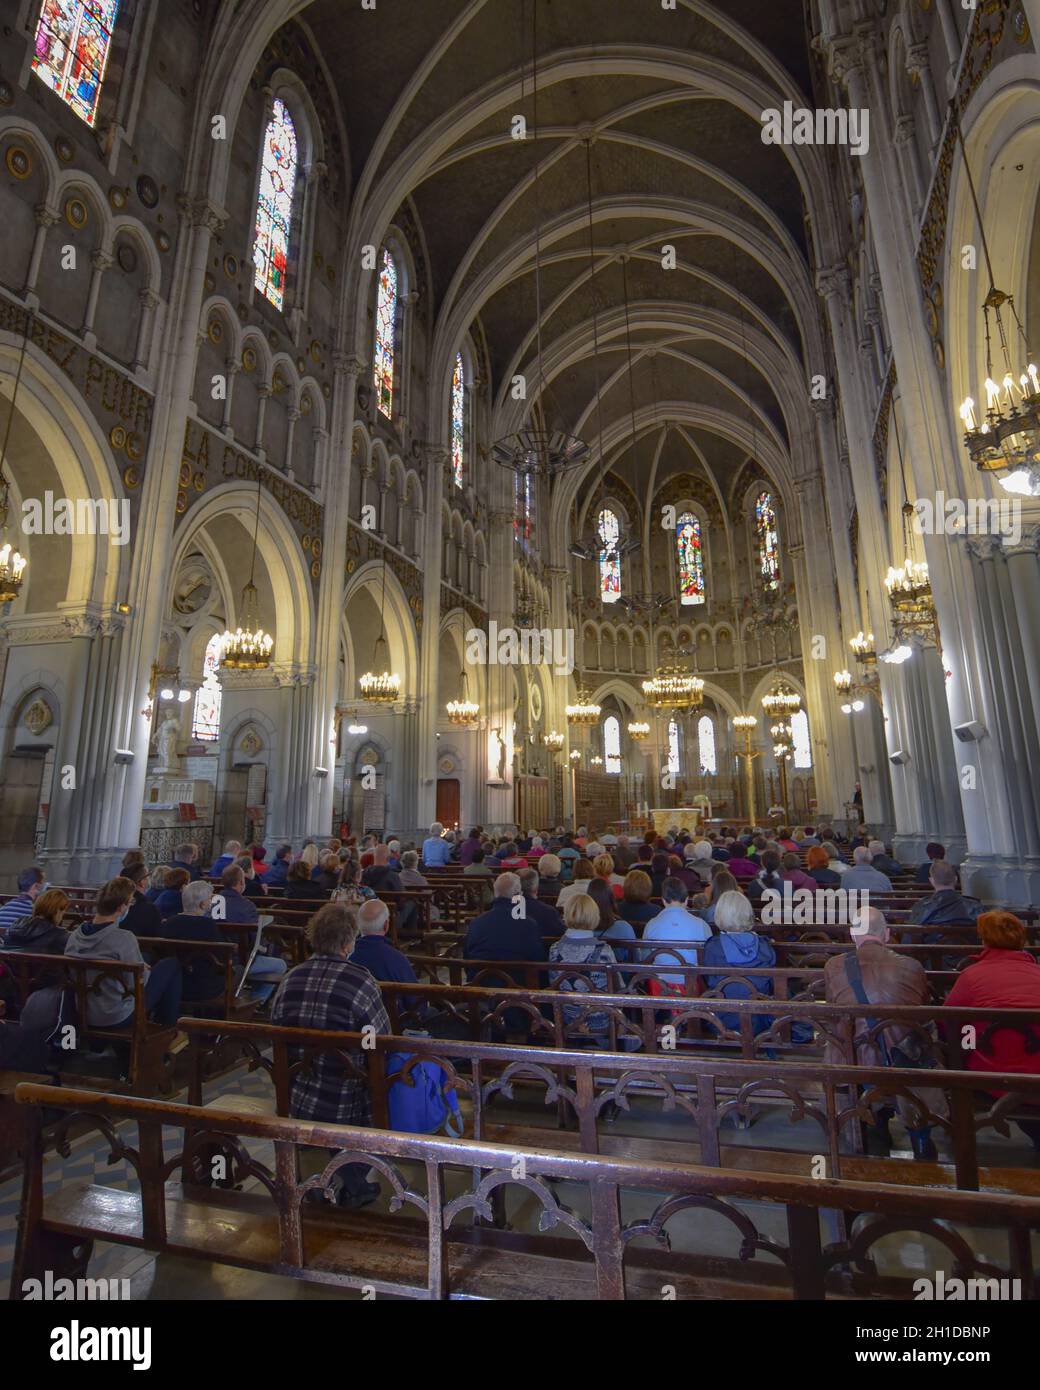 Lourdes, France - 9 Oct 2021: Mass service at the Chapel of the Asencion in the Rosary Basilica of Lourdes Stock Photo